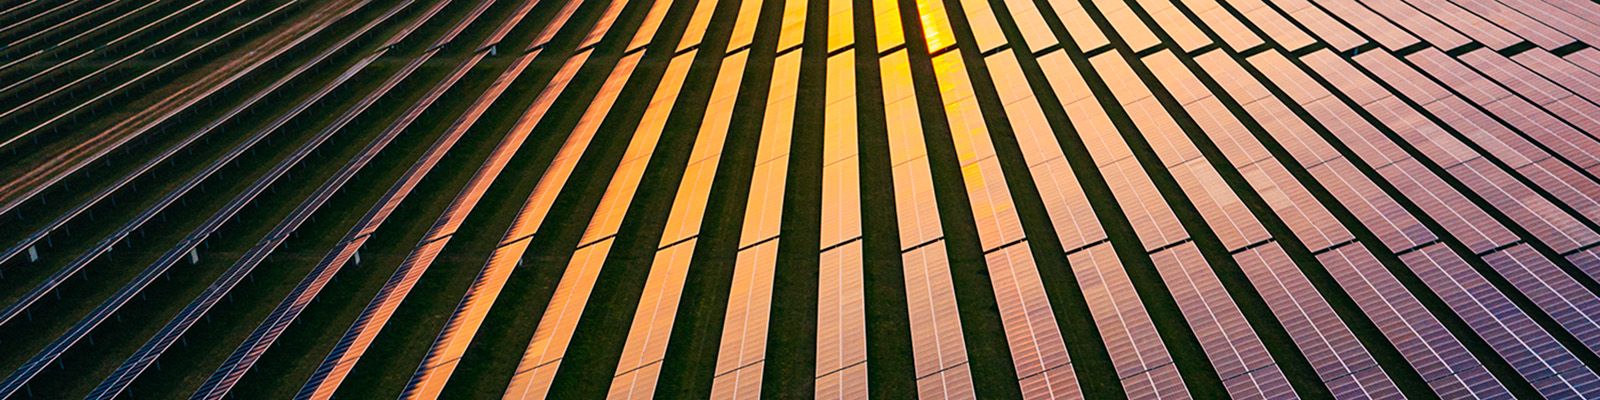 solar field - KPMG Commodities trading services